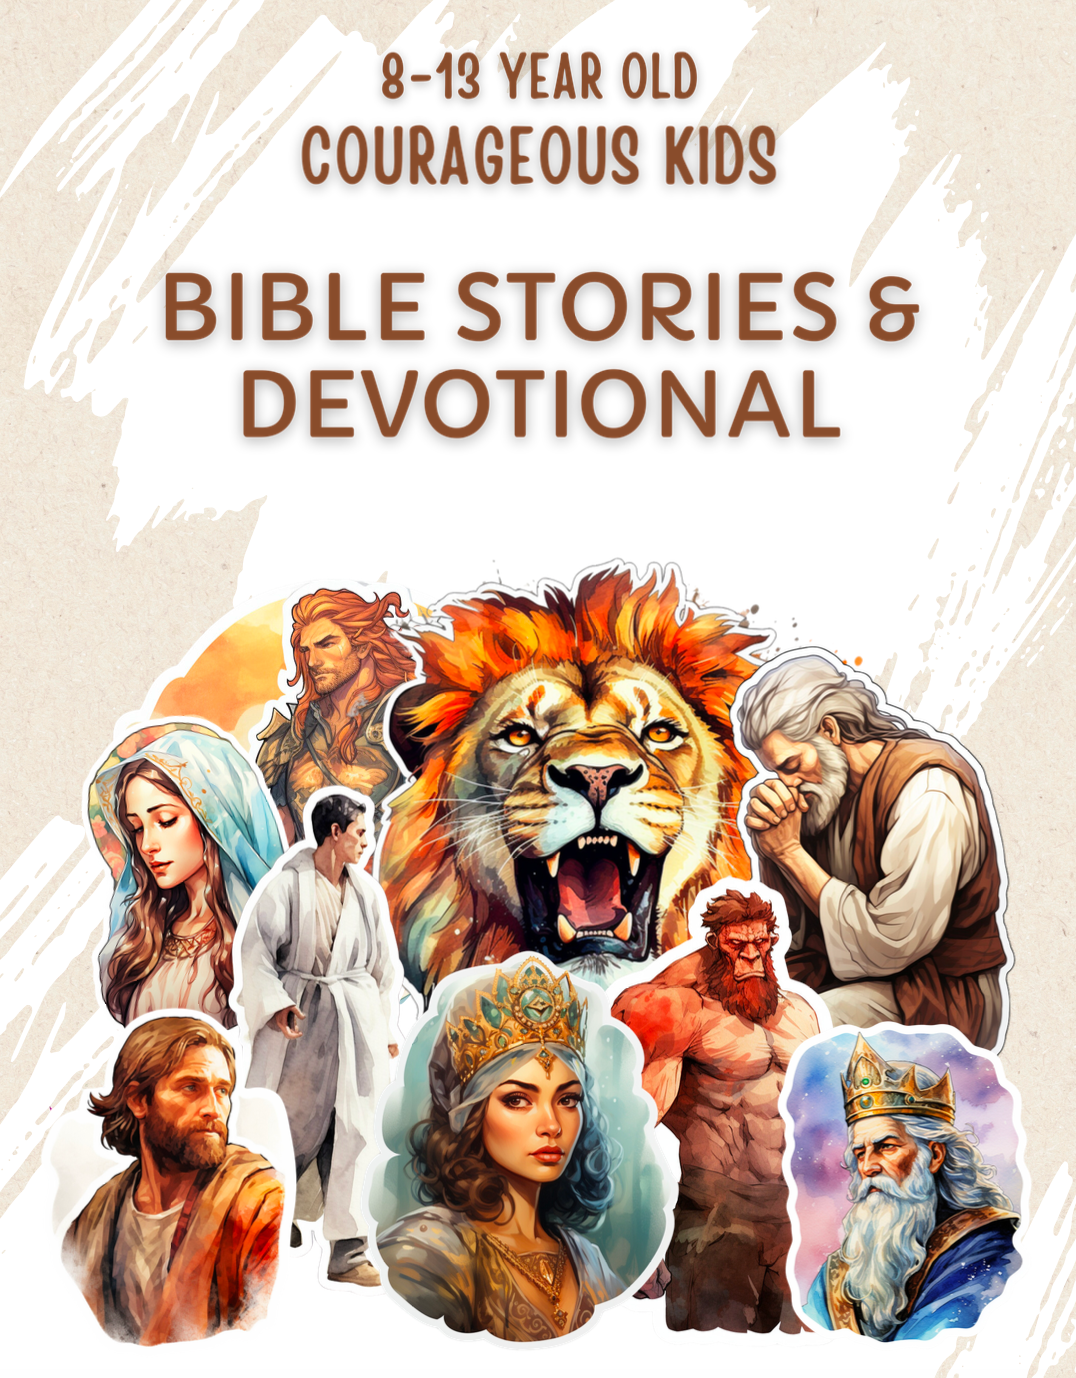 Bible Stories & Devotional Set for Kids: Age 8-13 - Set of 8 Colorful Illustrated Bible Stories with Reflective Questions